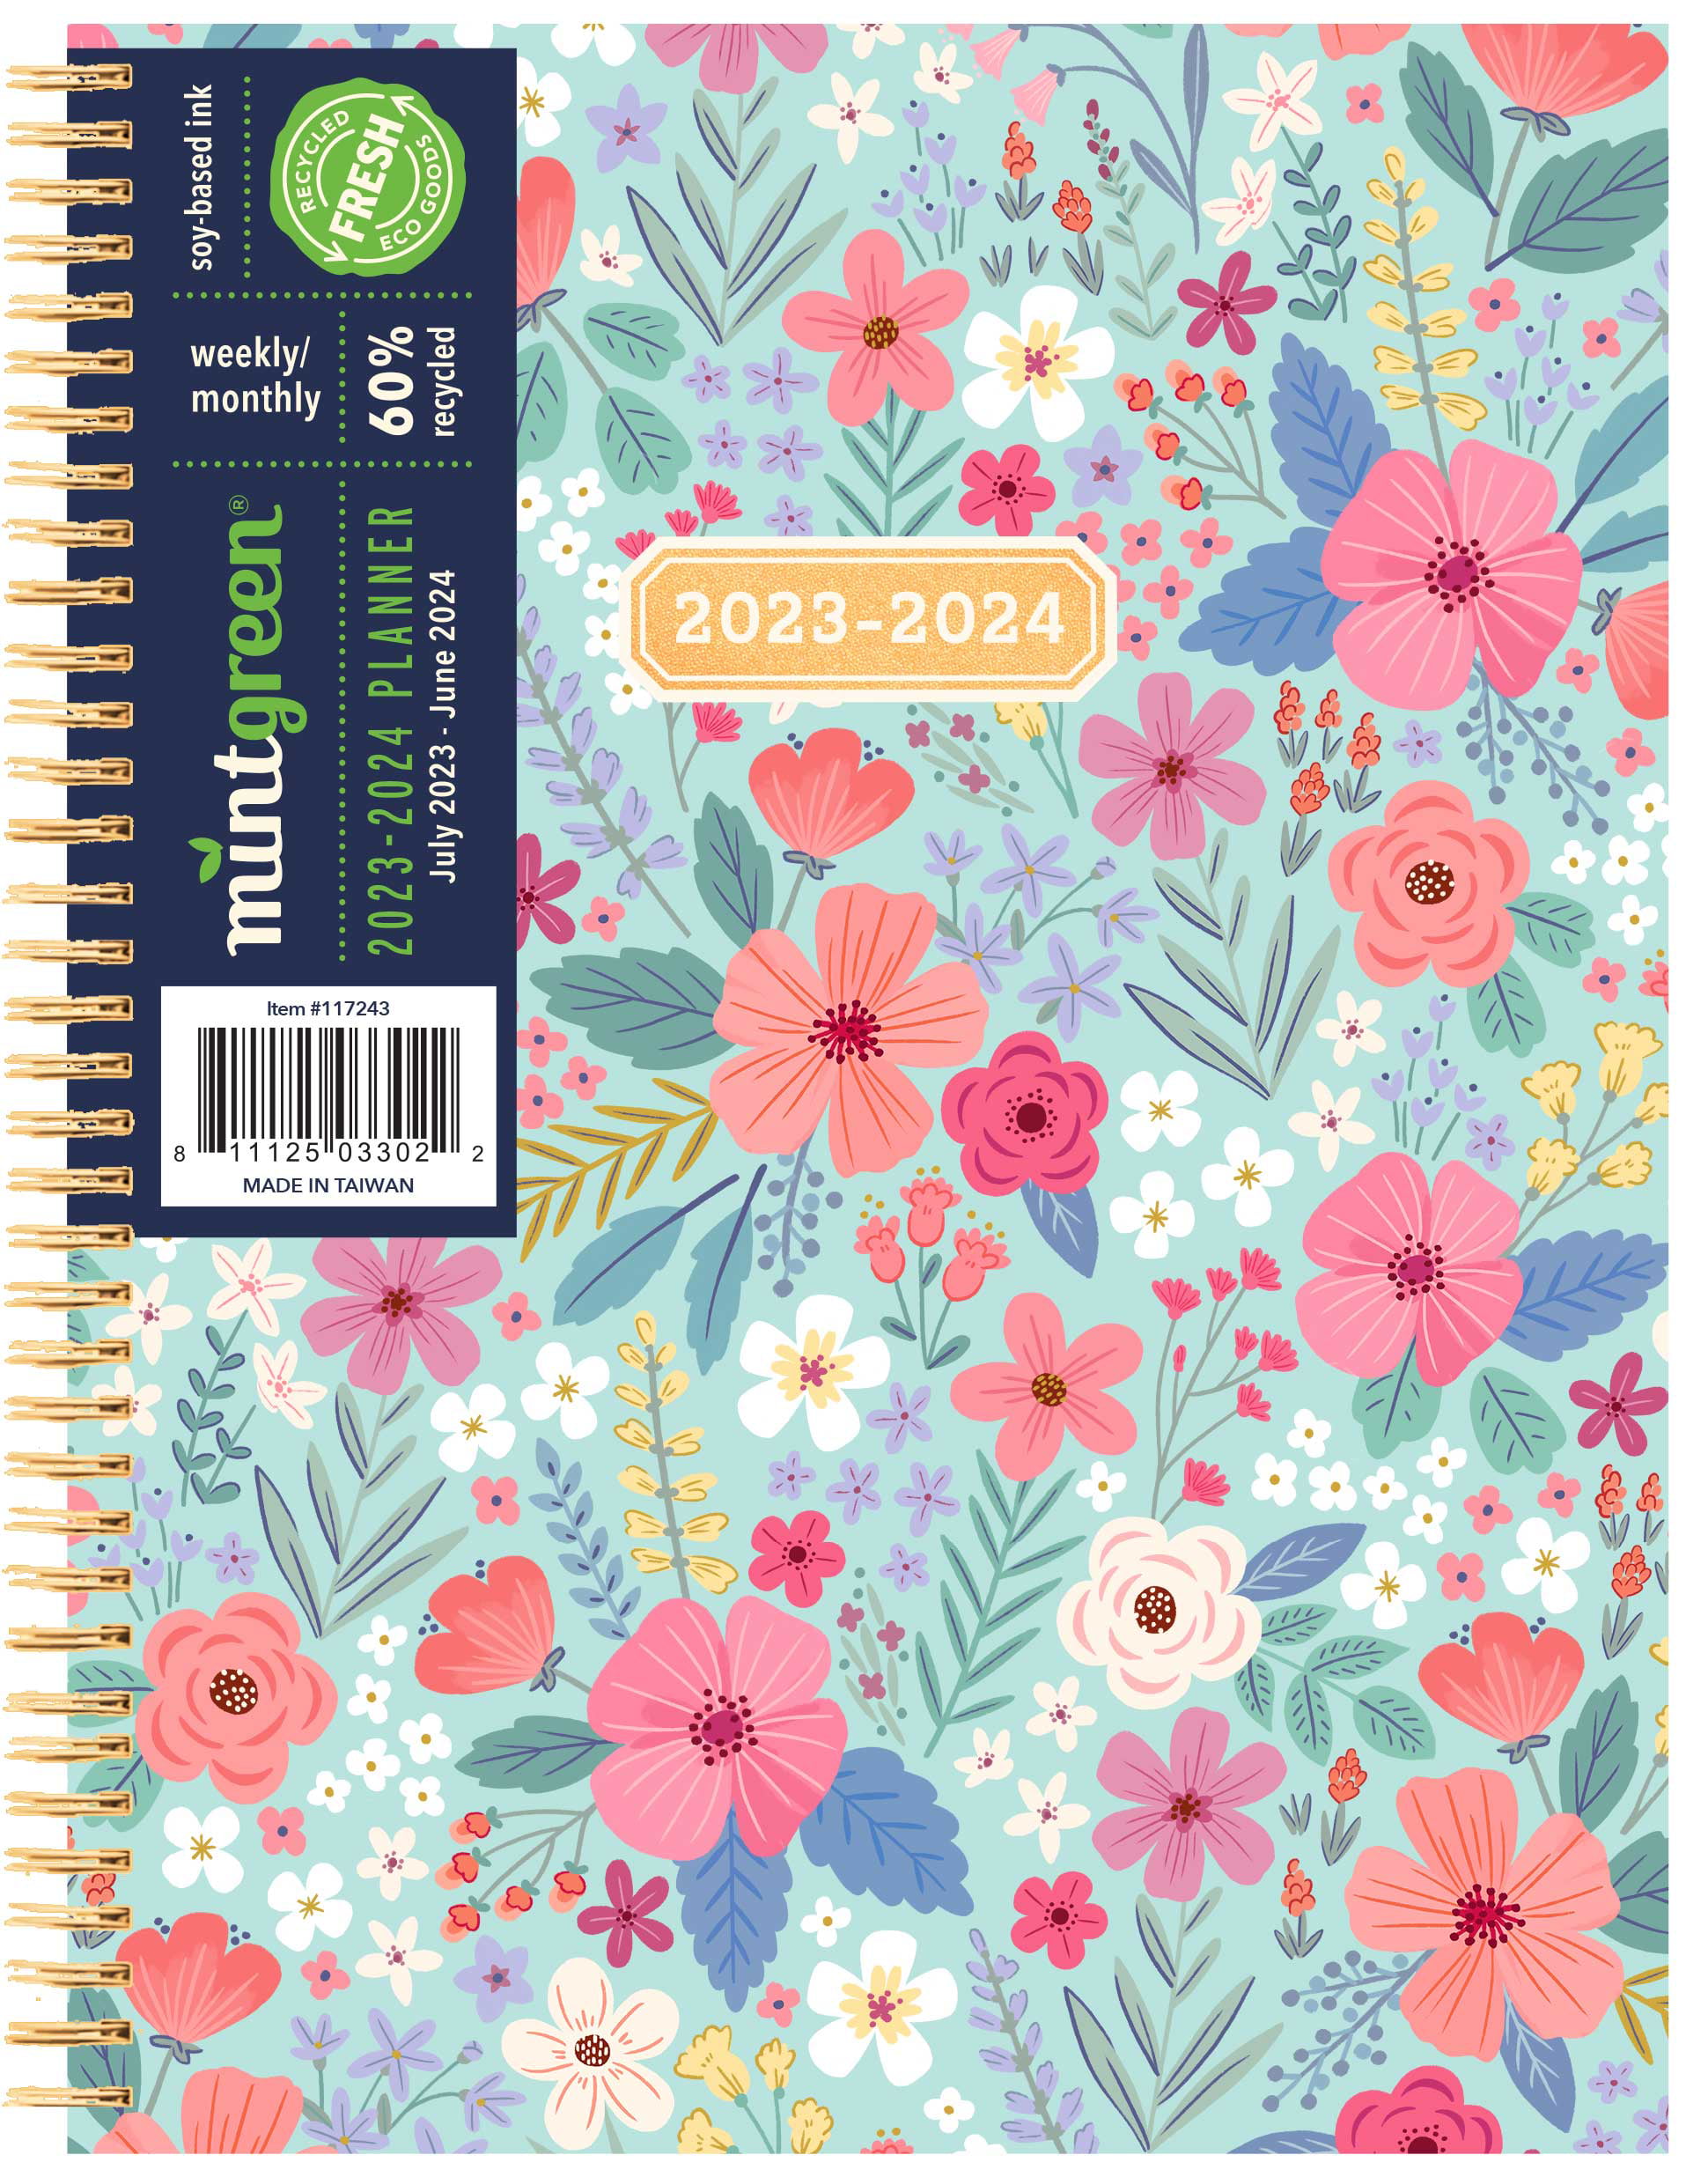 2023-2024-mintgreen-weekly-monthly-spiral-planner-6-x-8-mint-ditsy